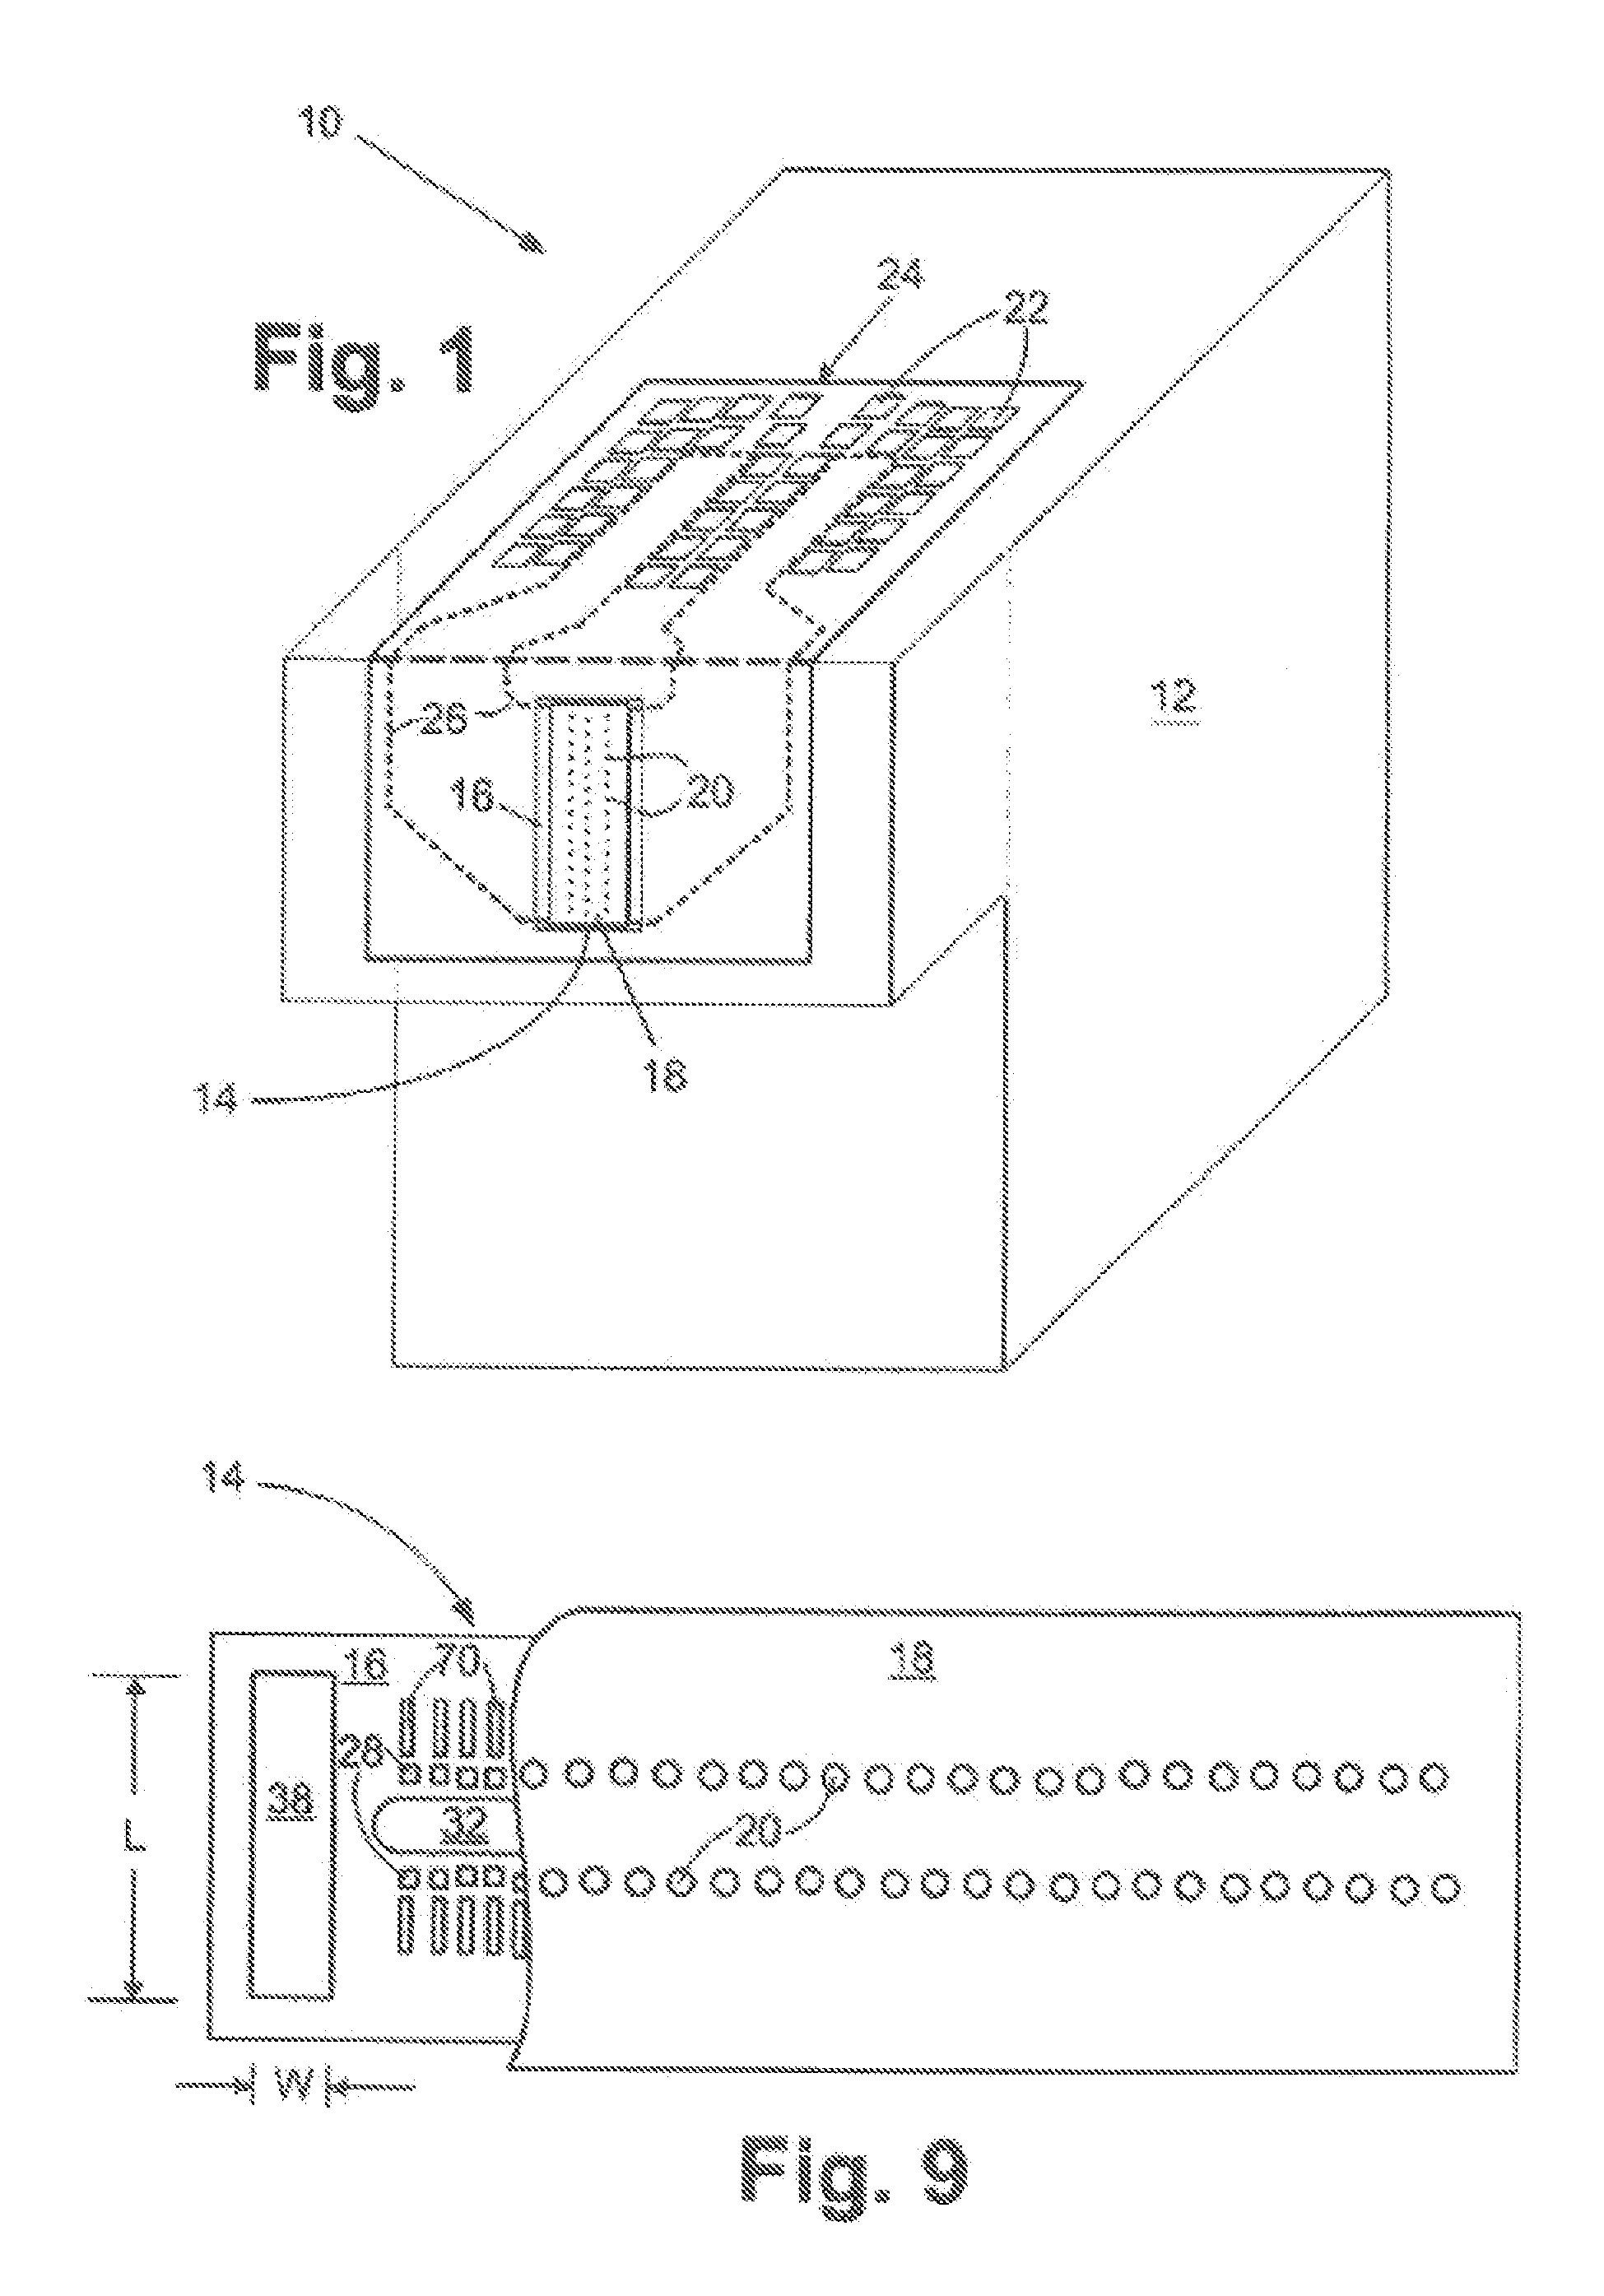 Micro-fluid ejecting device having embedded memory devices